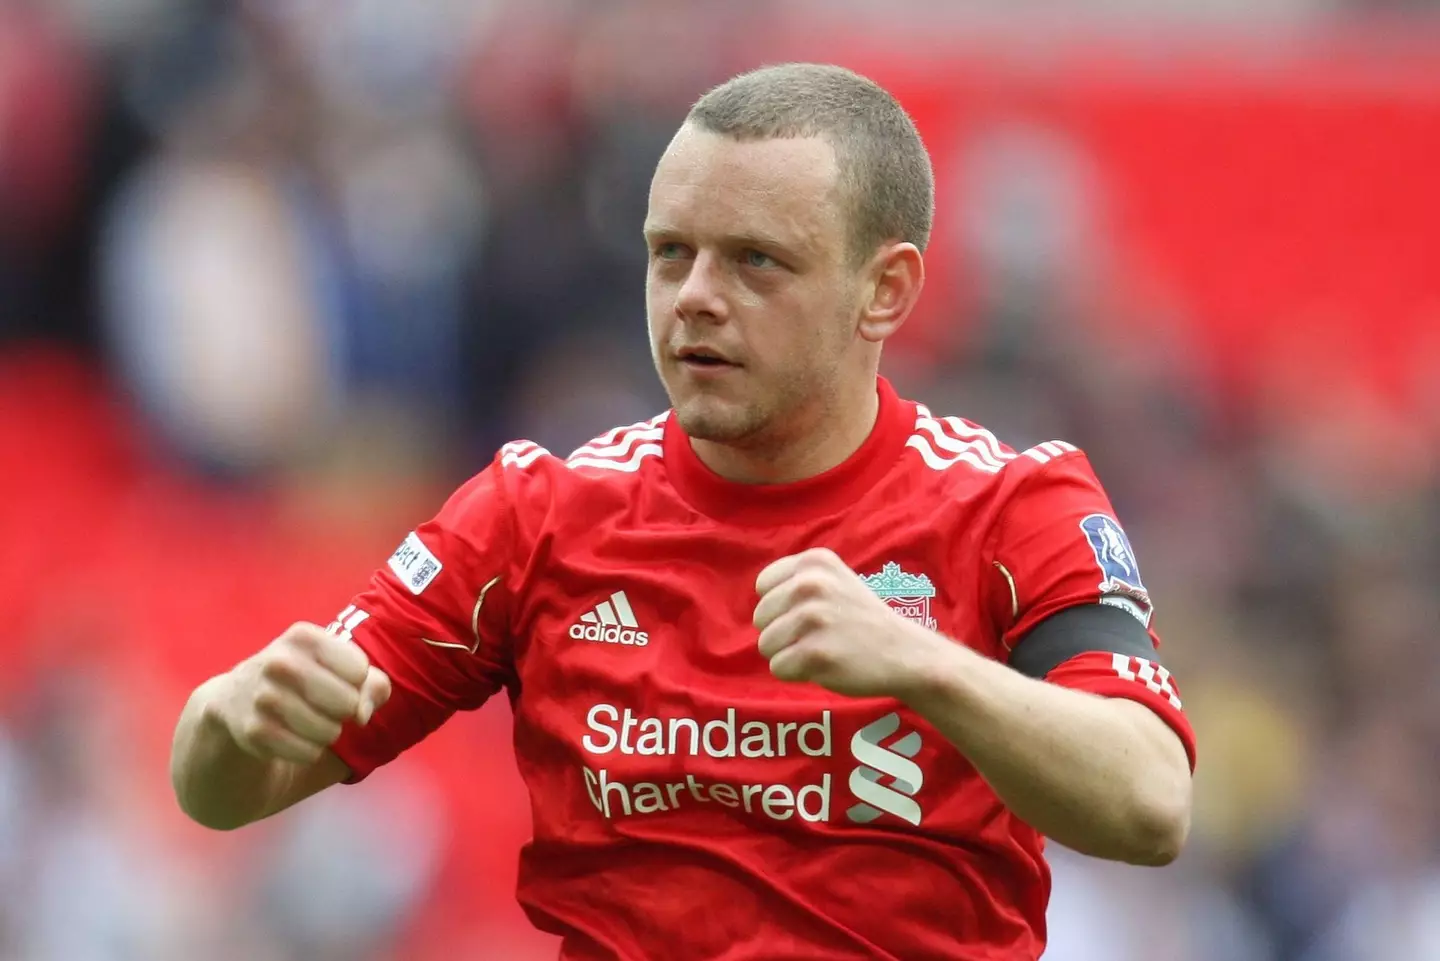 Spearing left Liverpool nearly a decade ago. Image: Alamy